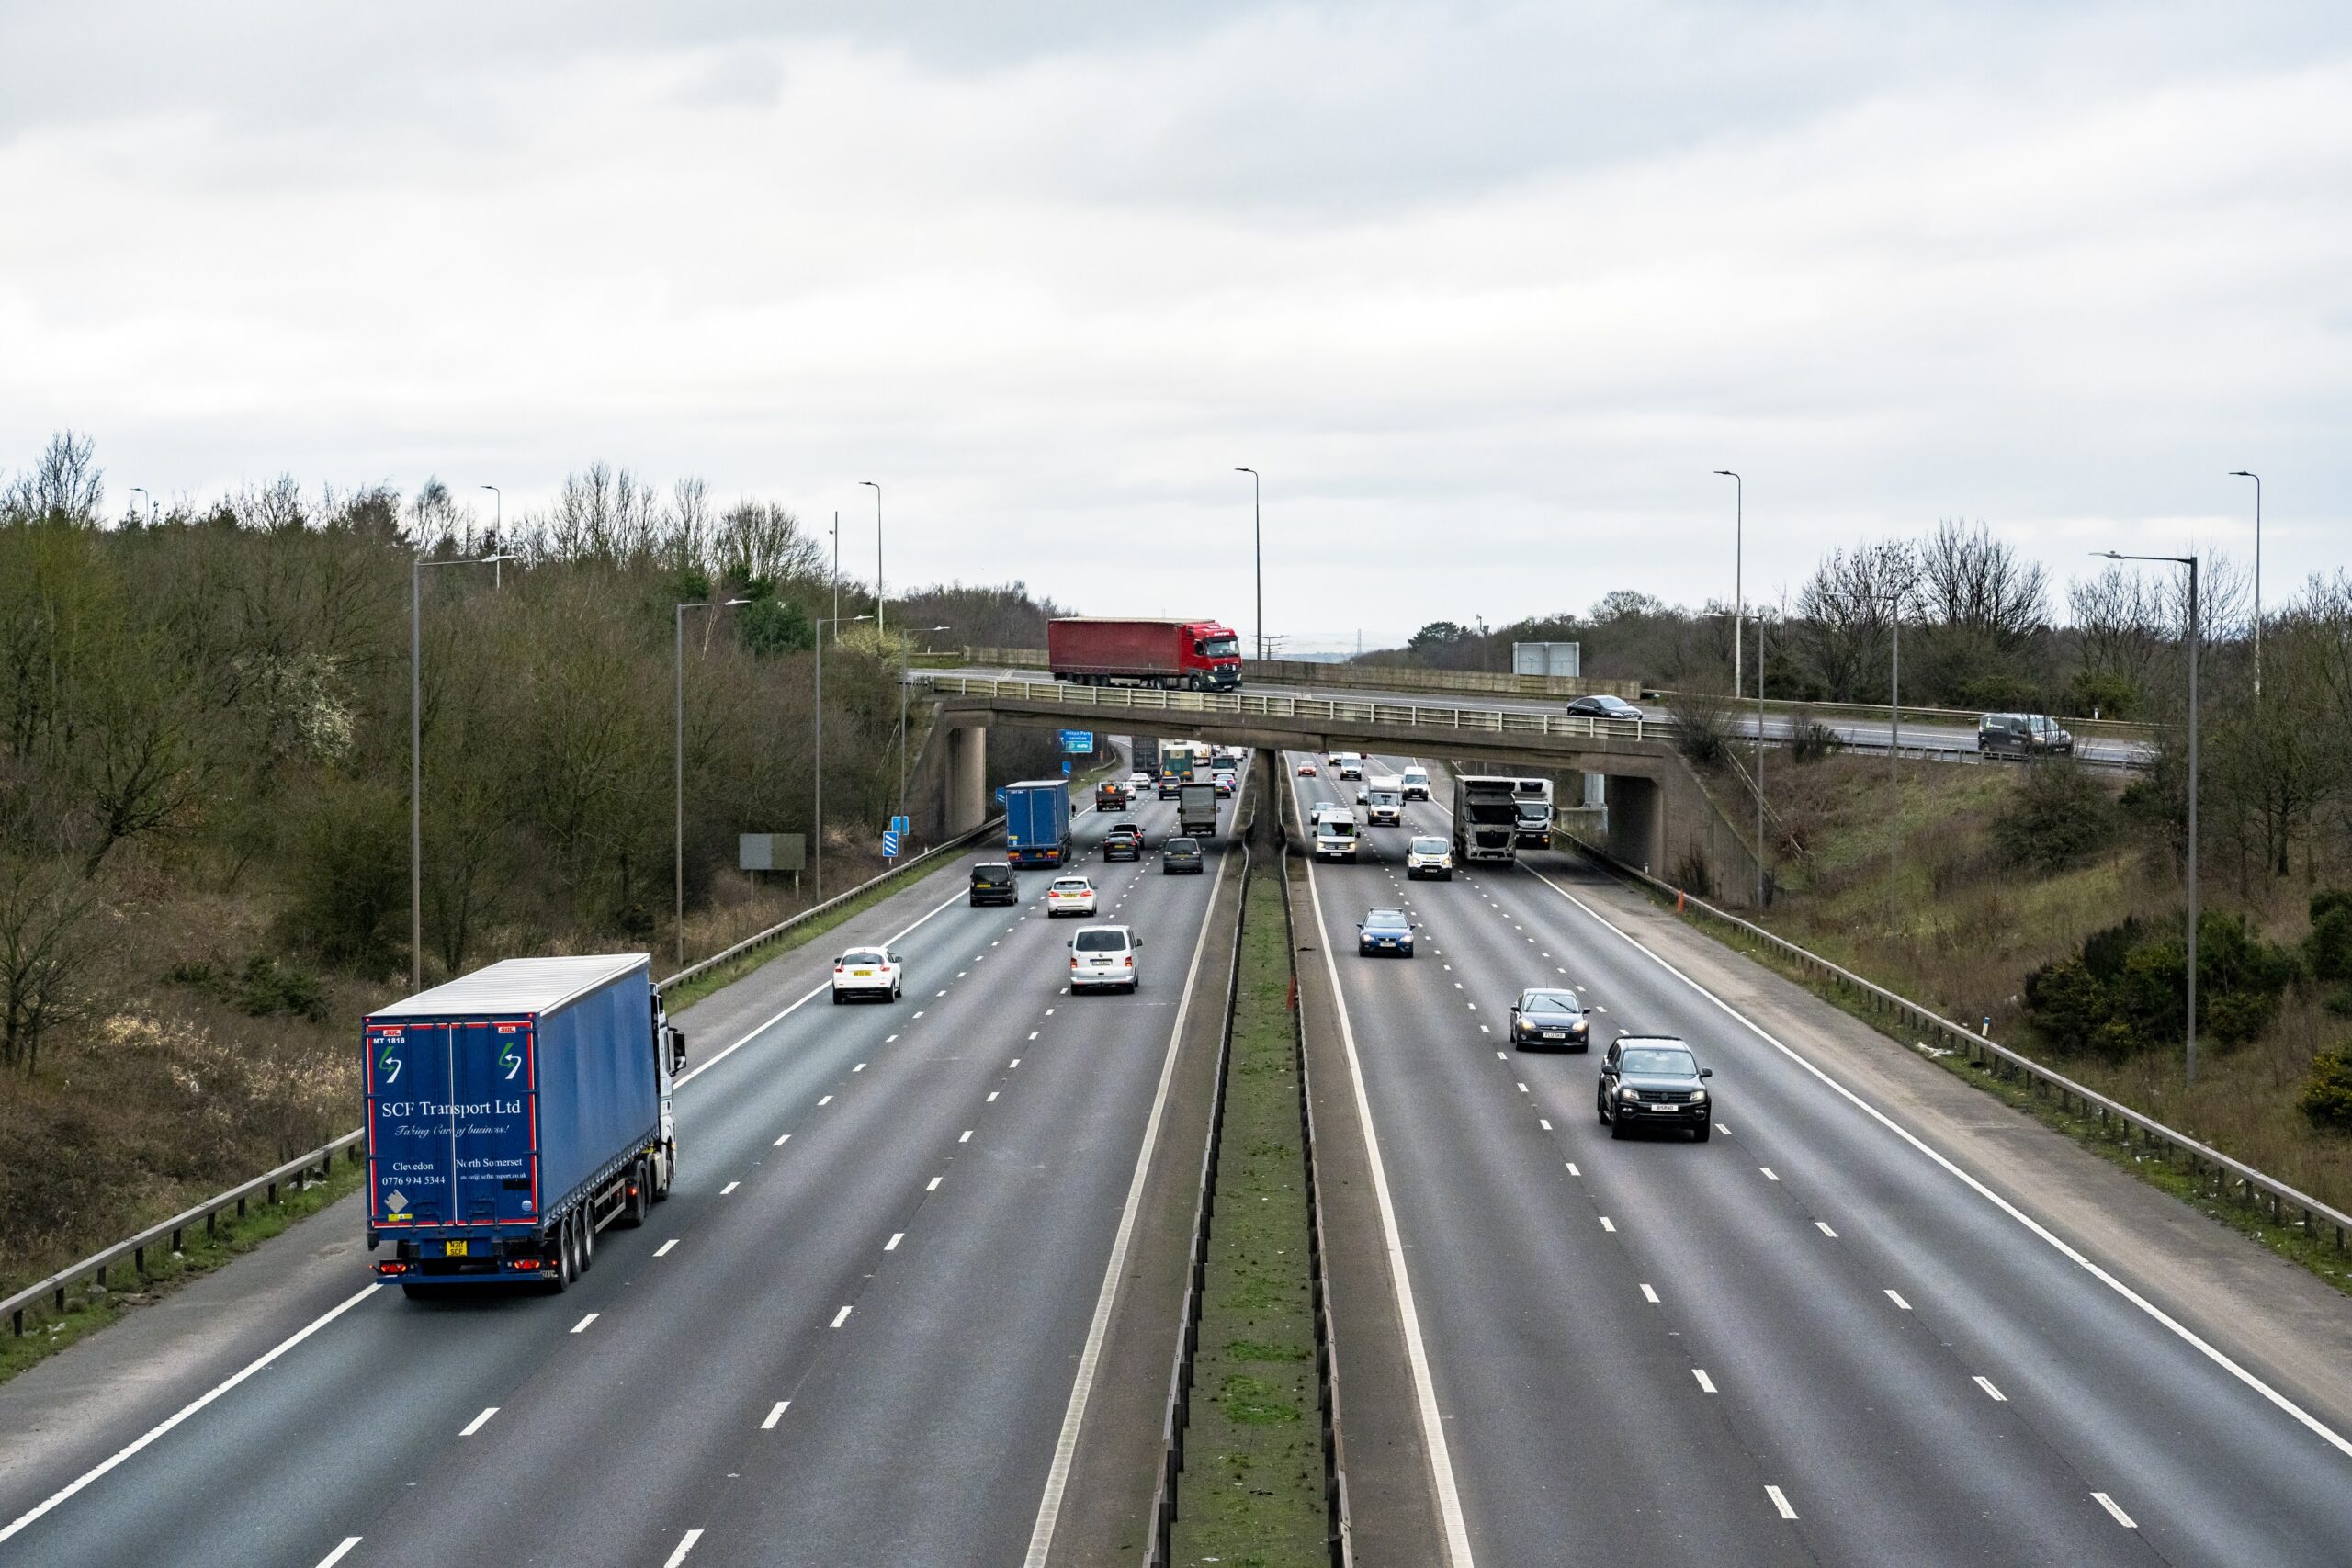 Cars and lorries driving along the motorway.